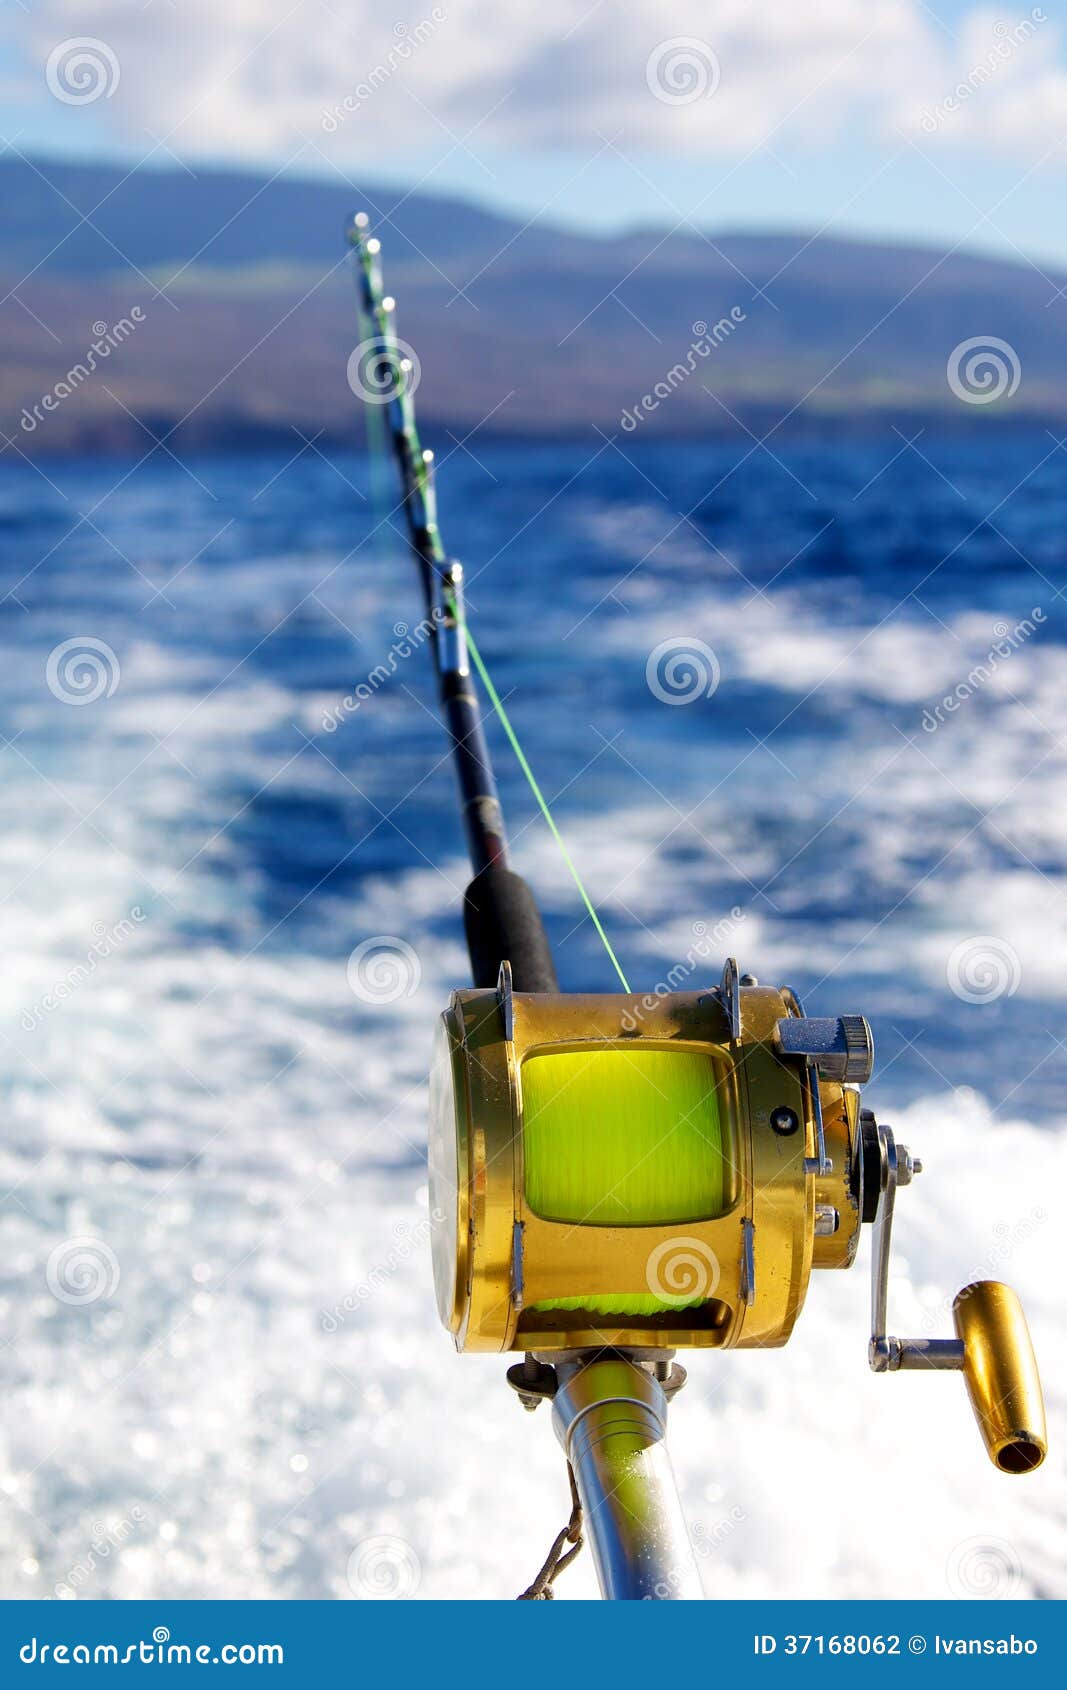 Trolling for big game stock photo. Image of leisure, hawaii - 37168062